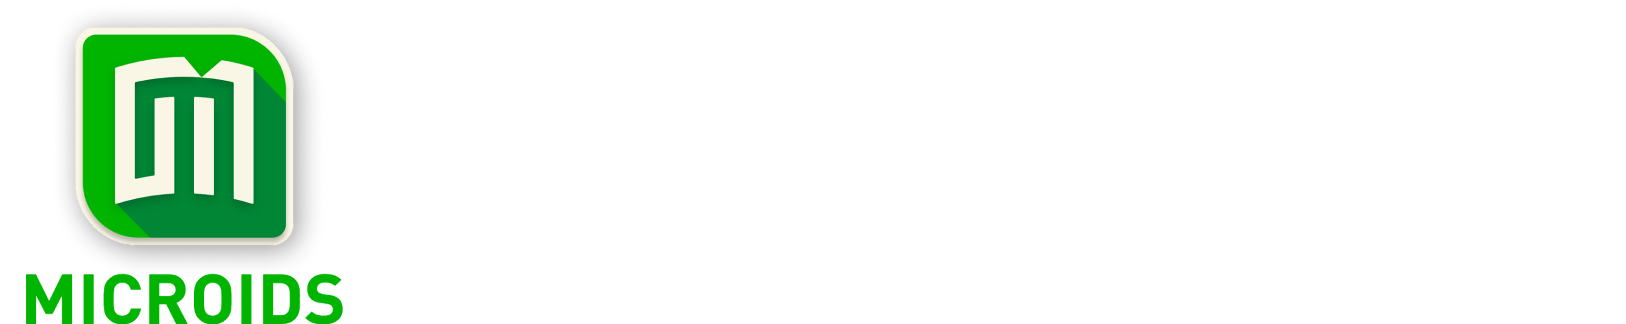 Microids: Games & Comics Crossover Collection